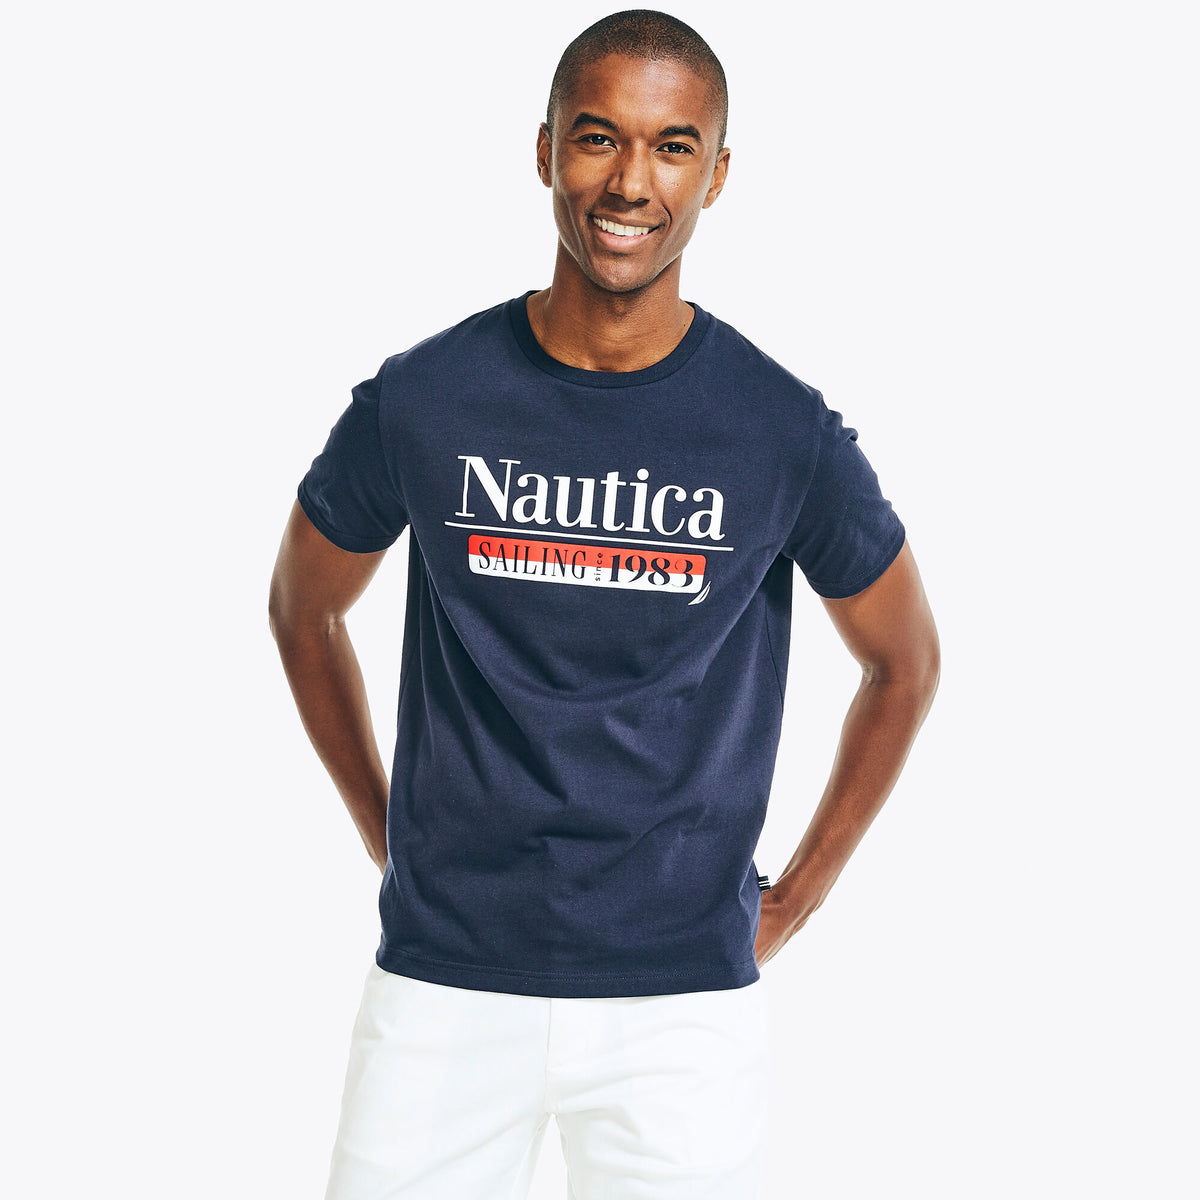 Nautica Men's Big & Tall Sustainably Crafted Sailing Graphic T-Shirt Navy